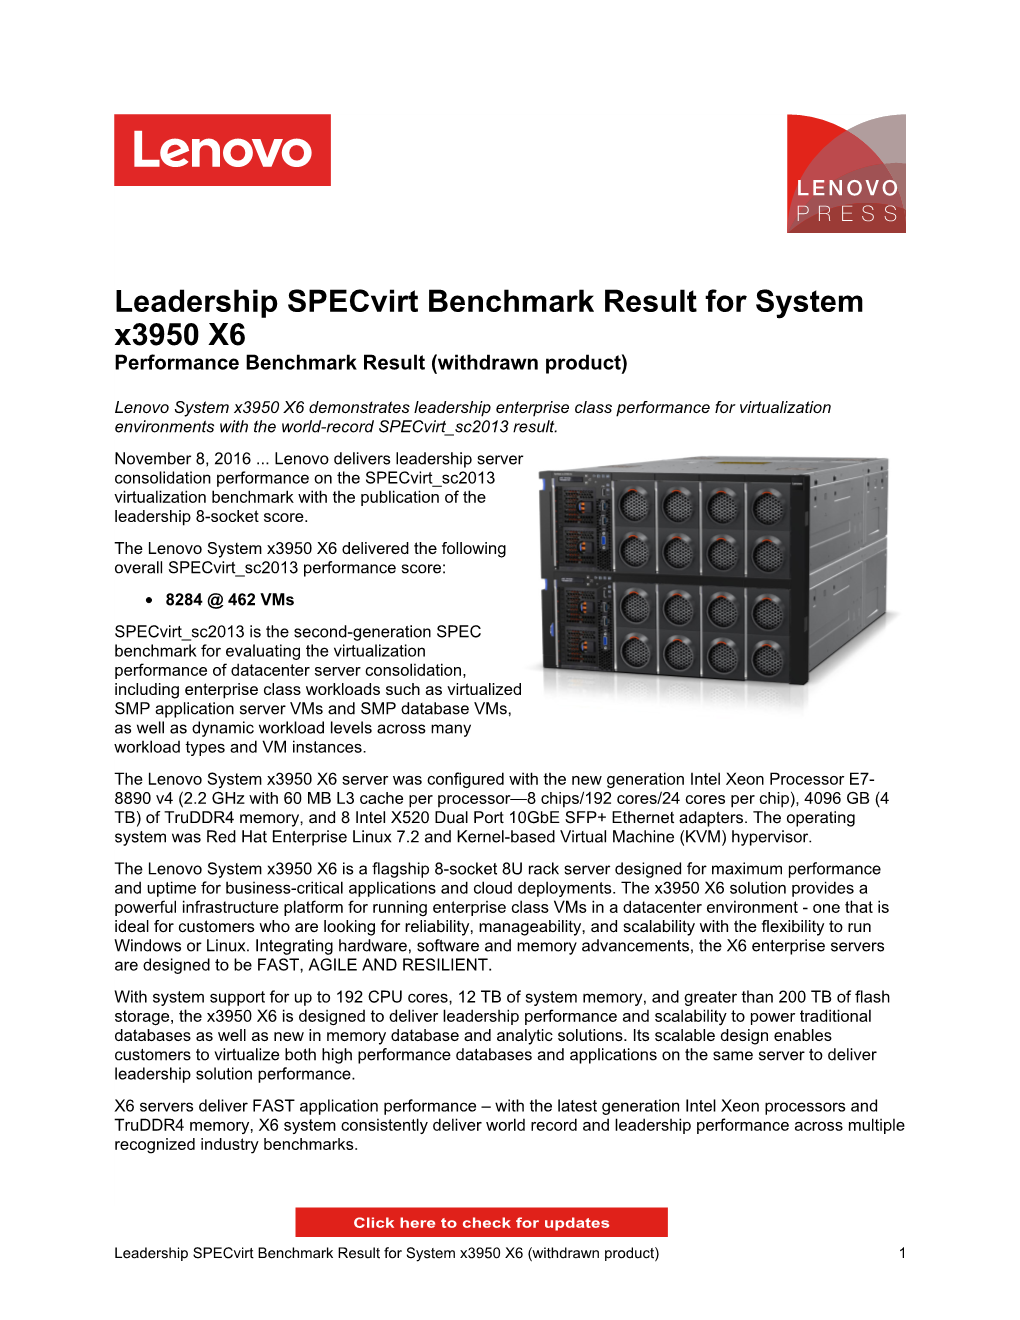 Leadership Specvirt Benchmark Result for System X3950 X6 Performance Benchmark Result (Withdrawn Product)